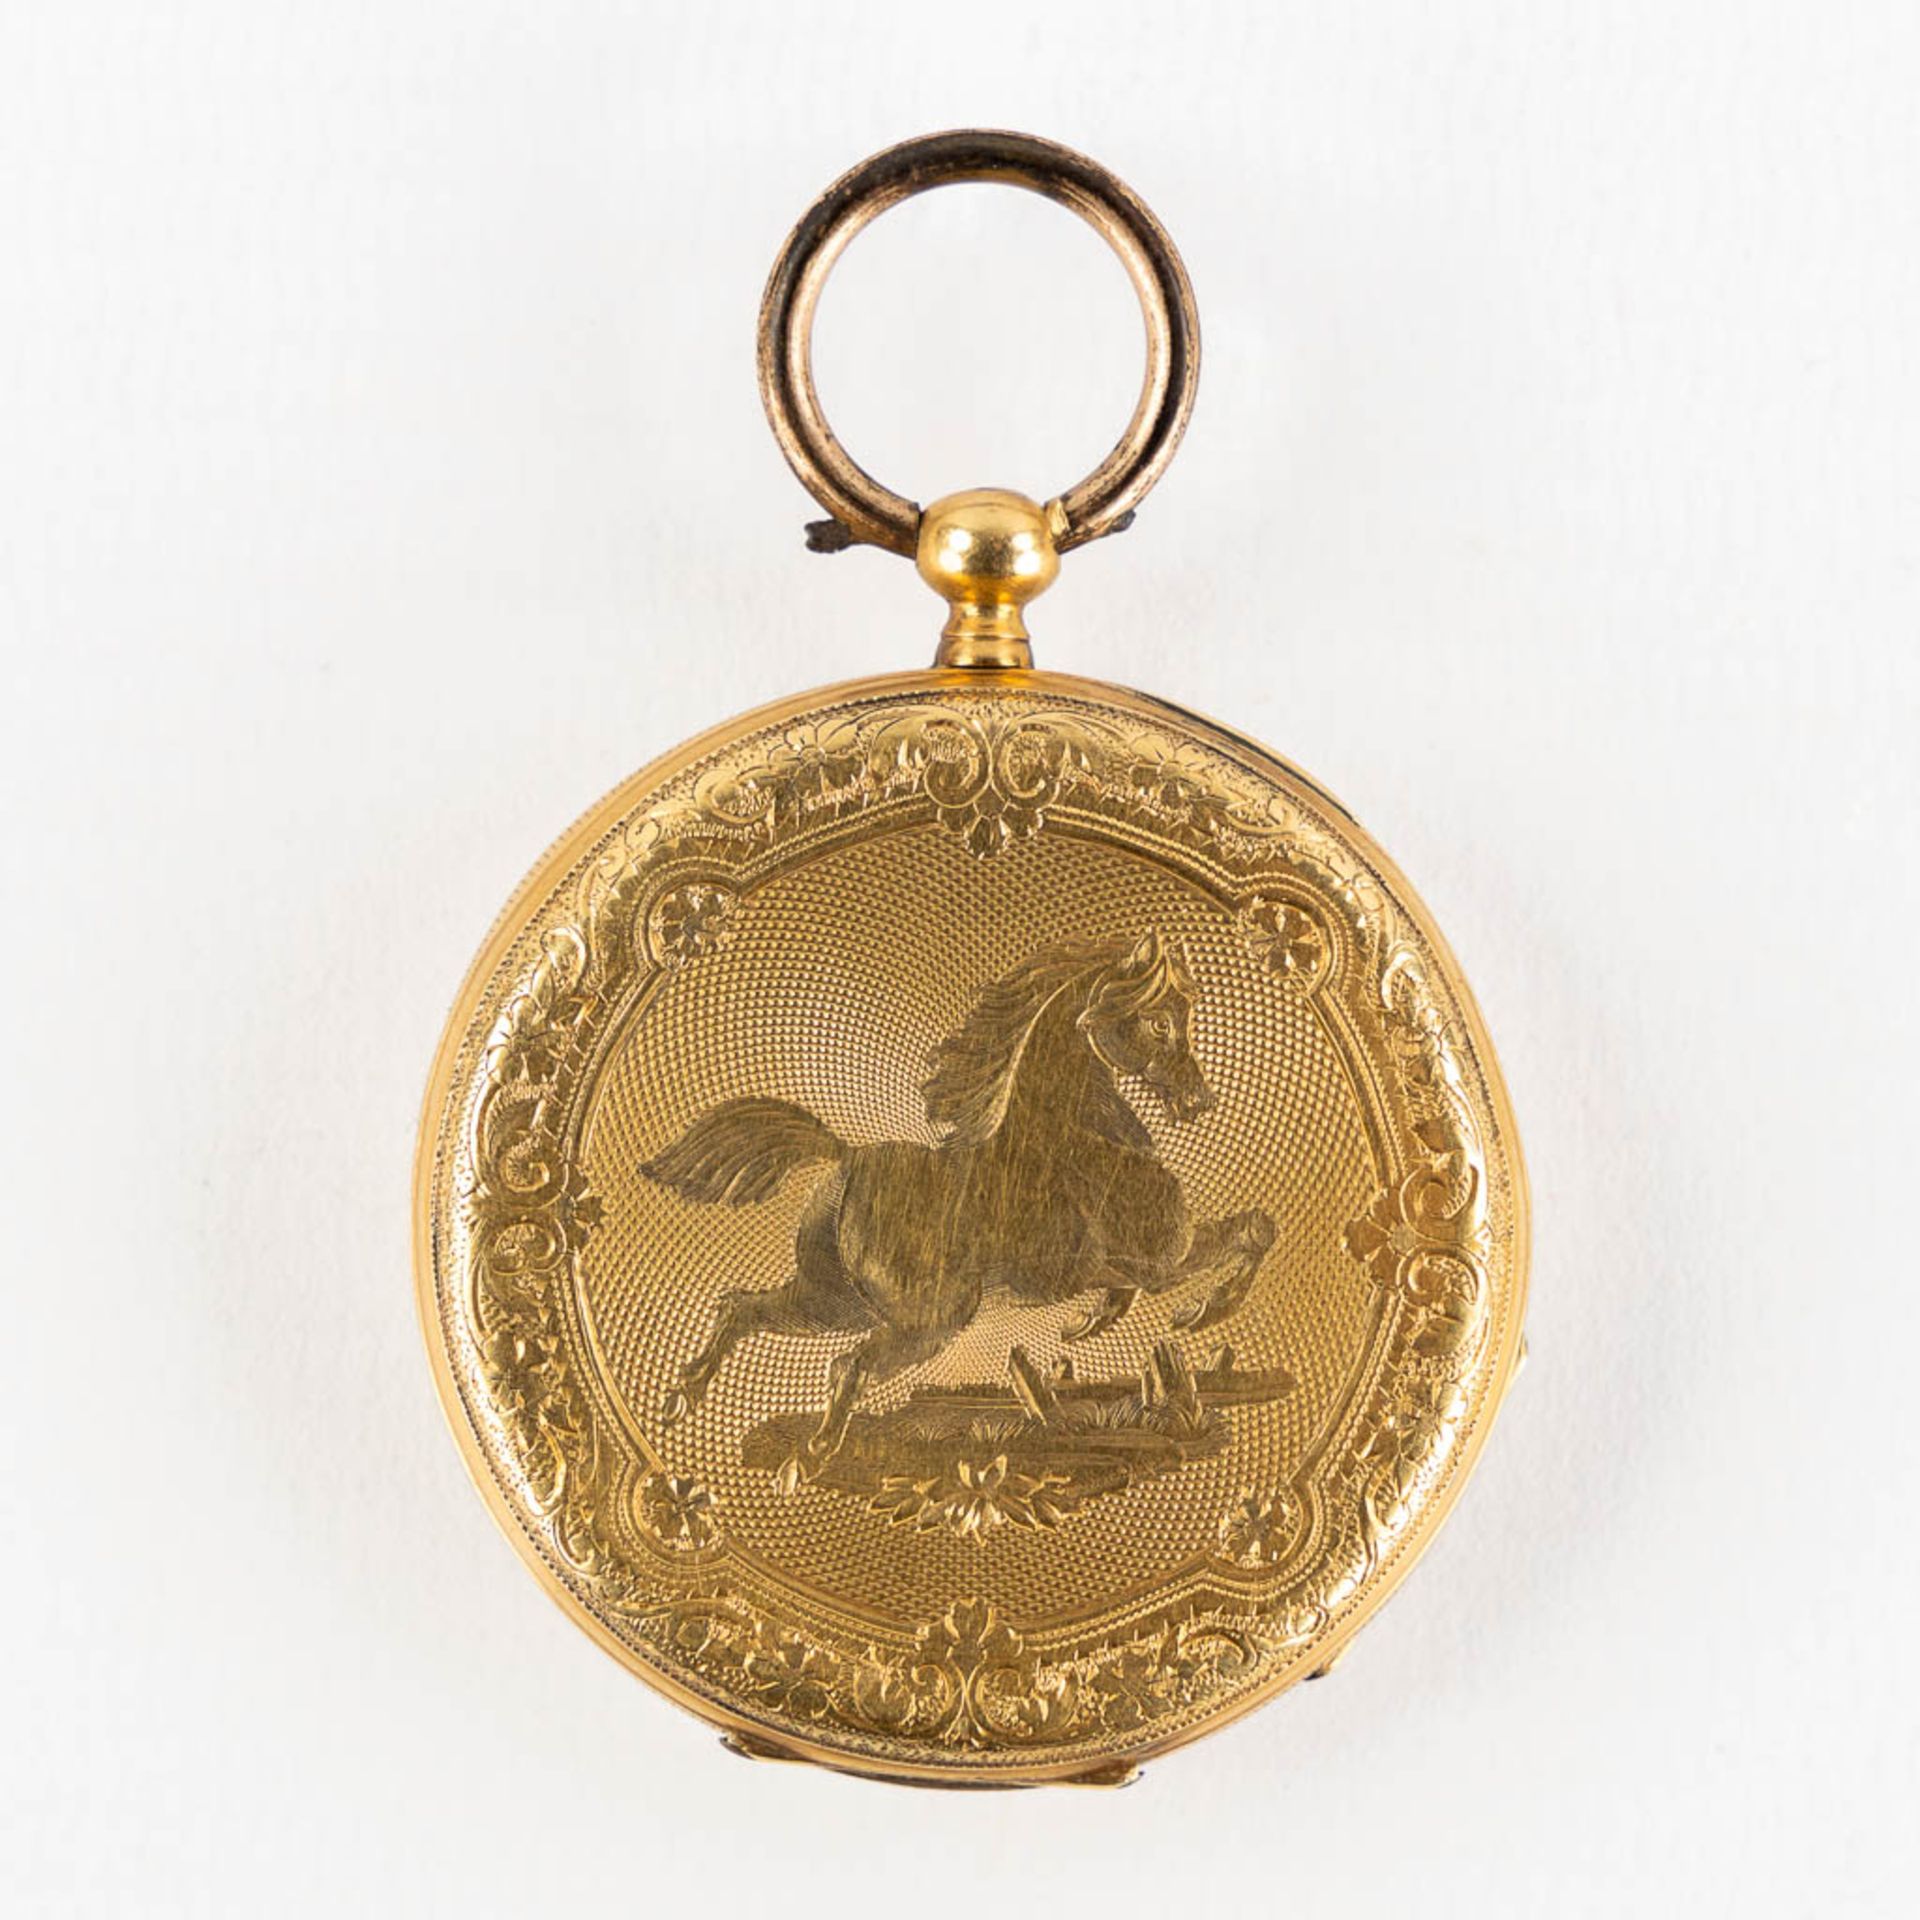 An antique pocket watch, 18kt yellow gold. Guioche image of a running horse. (W:4,3 x H:6,3 cm) - Image 9 of 15